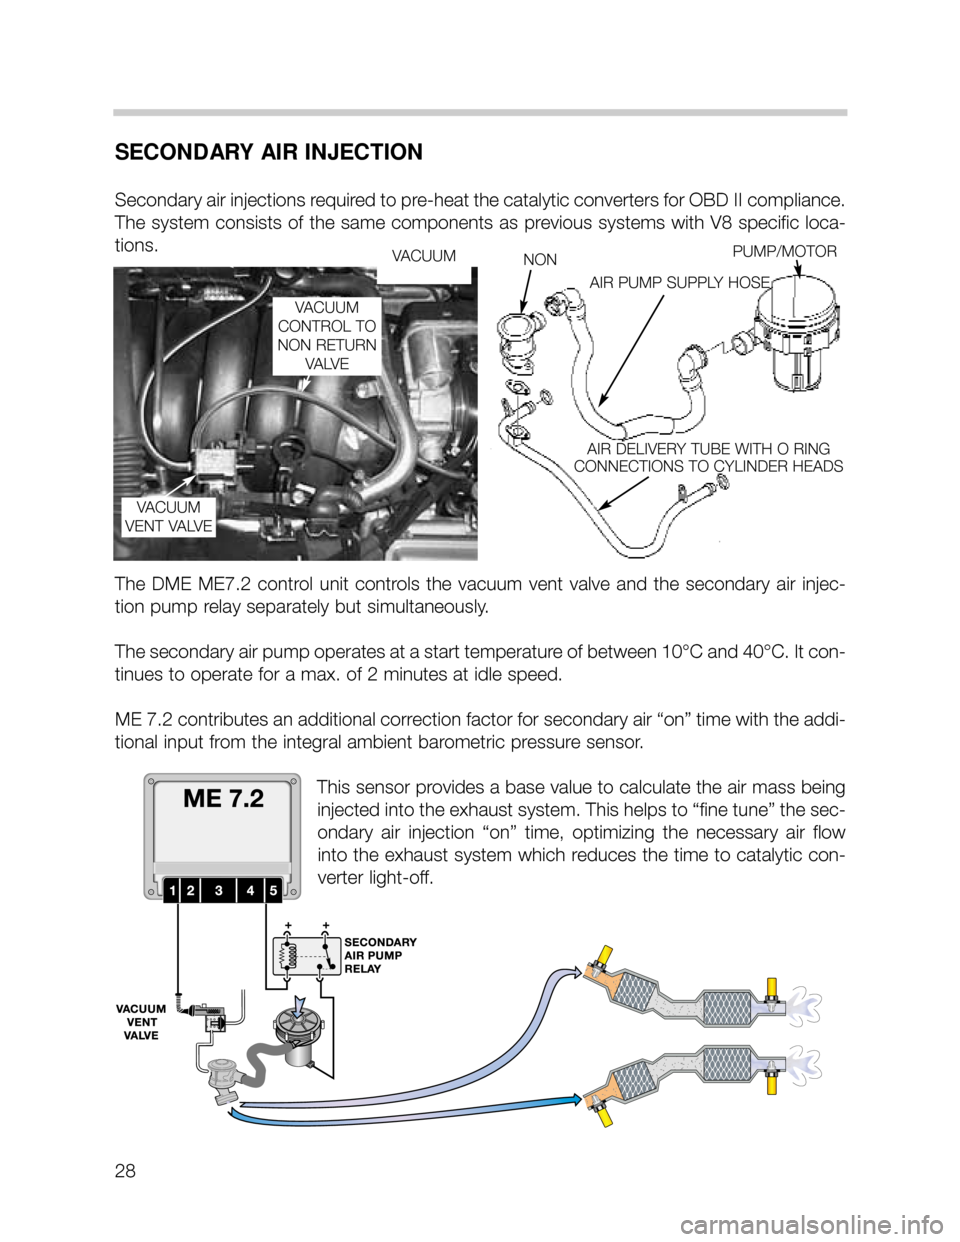 BMW X5 1999 E53 M62TU Engine Workshop Manual 28
SECONDARY AIR INJECTION
Secondary air injections required to pre-heat the catalytic converters for OBD II compliance.
The system consists of the same components as previous systems with V8 specific